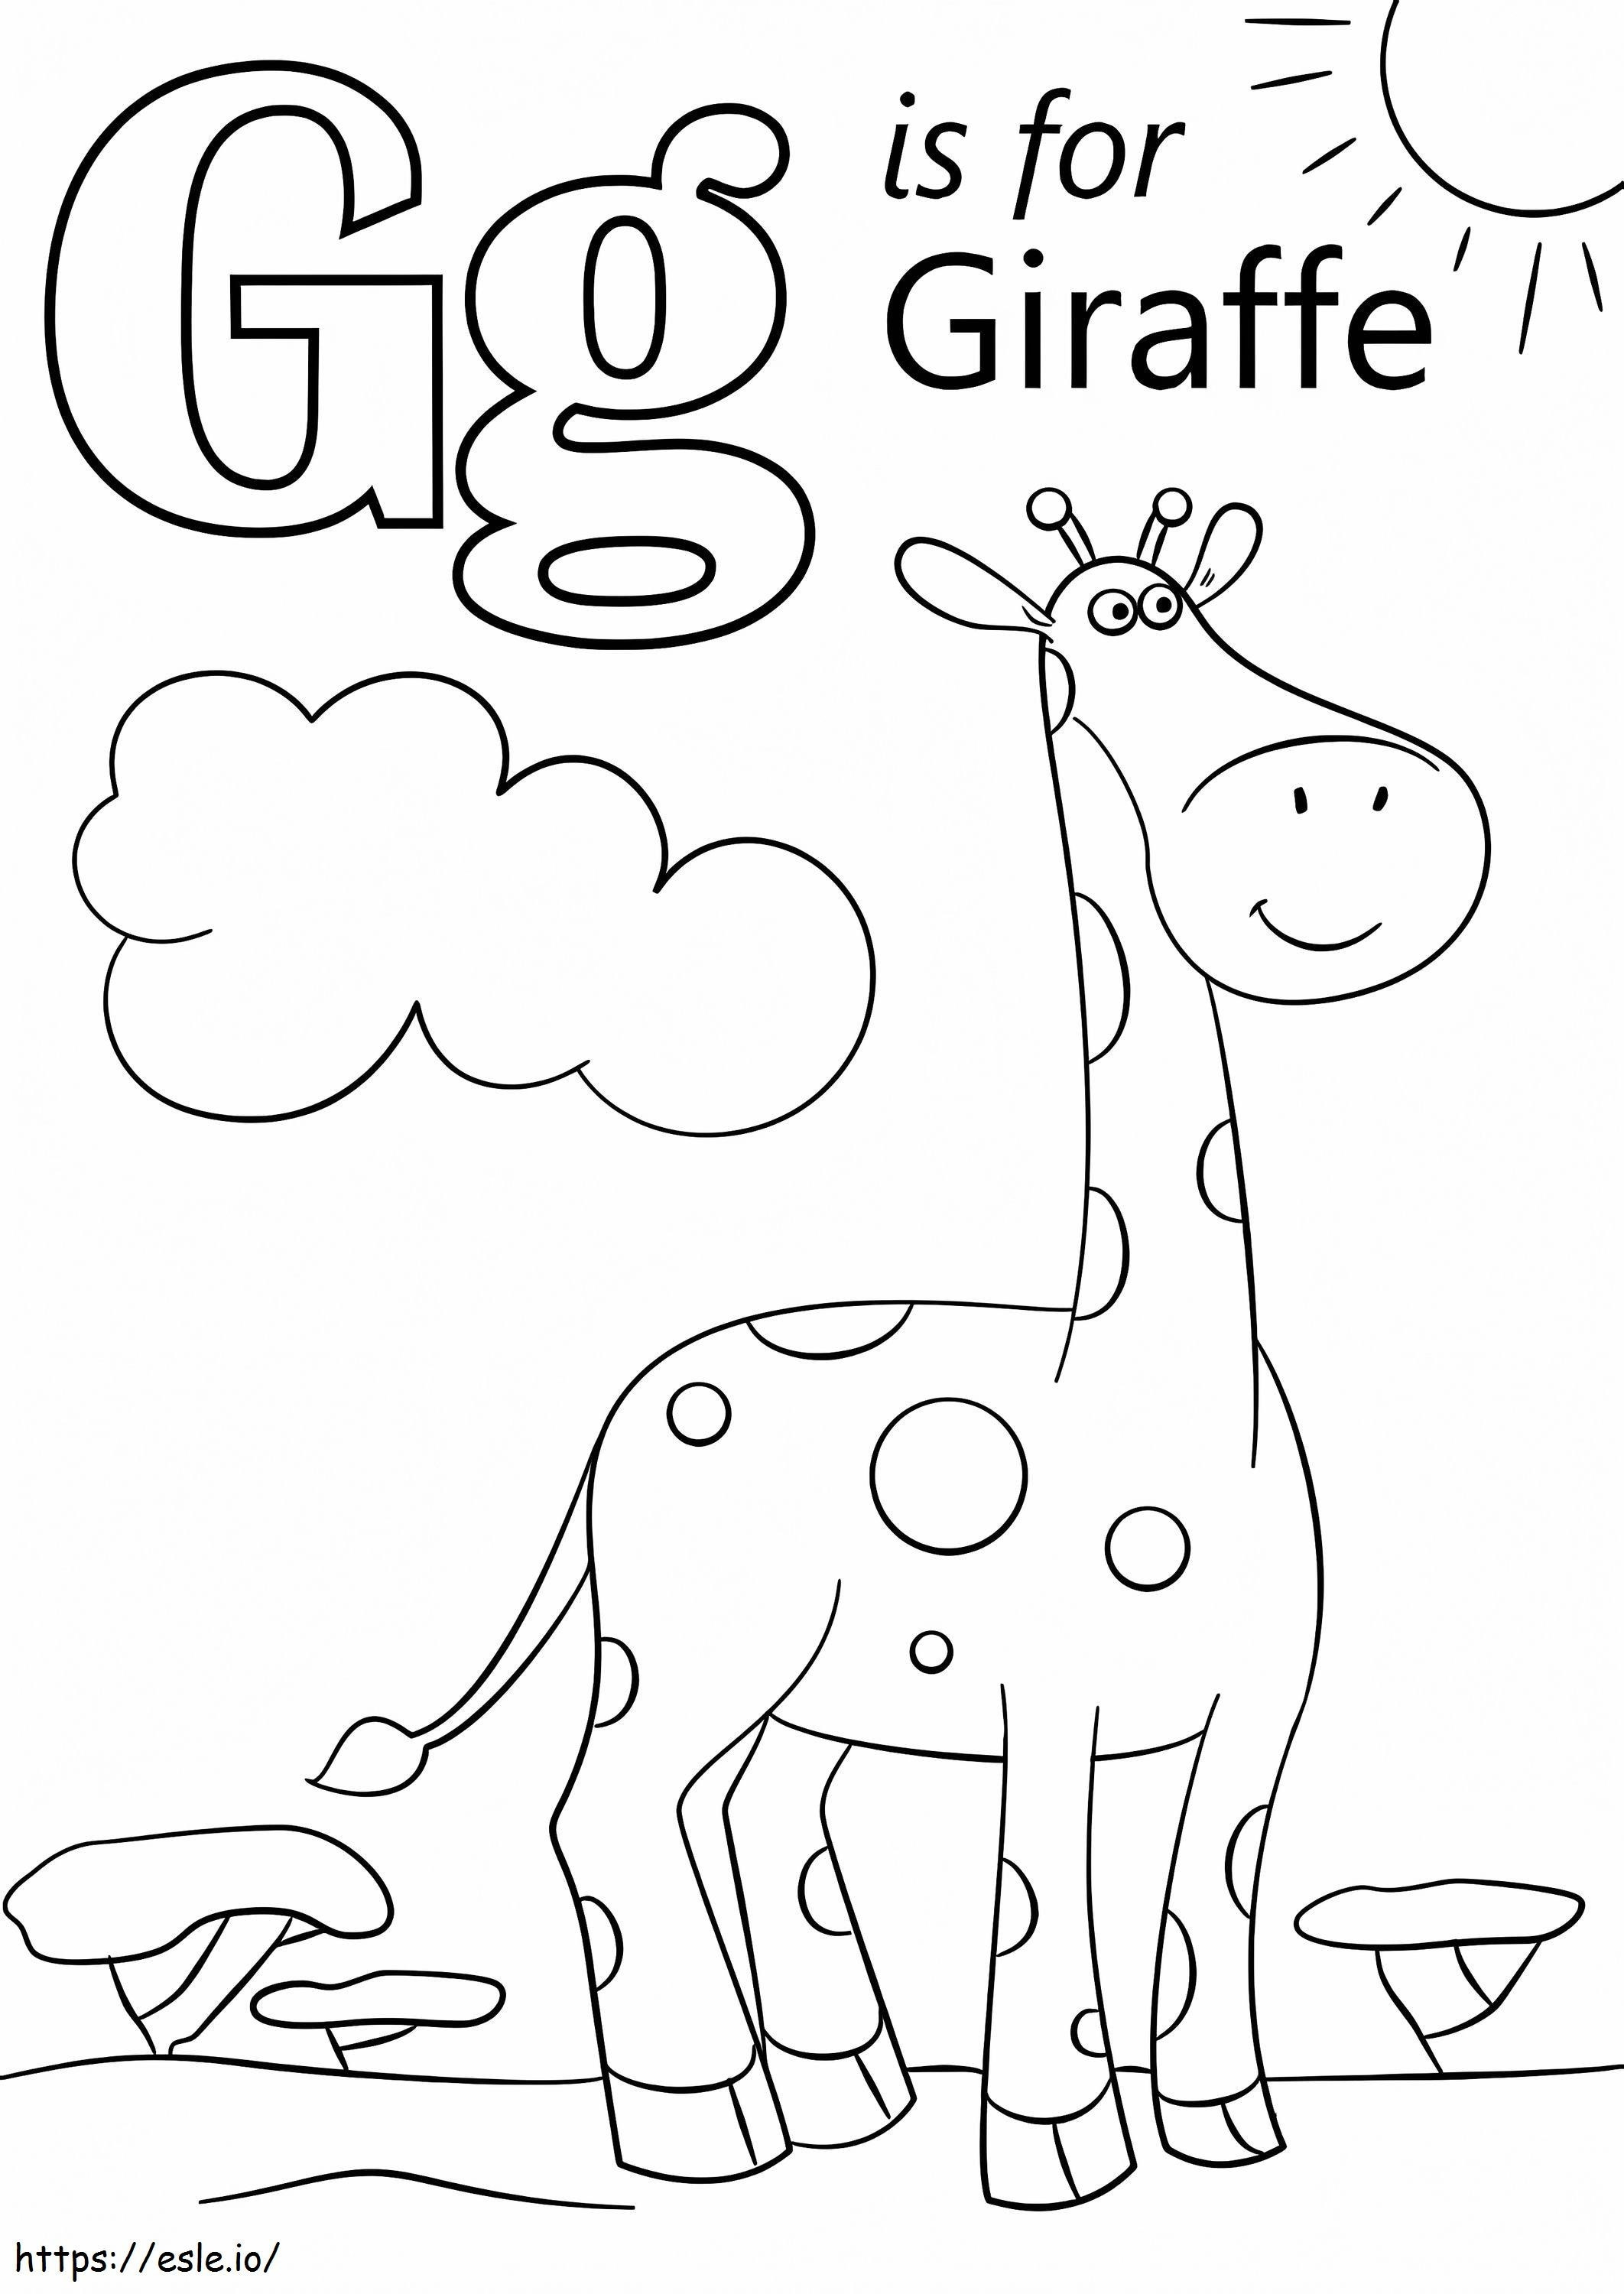 Giraffe Letter G coloring page